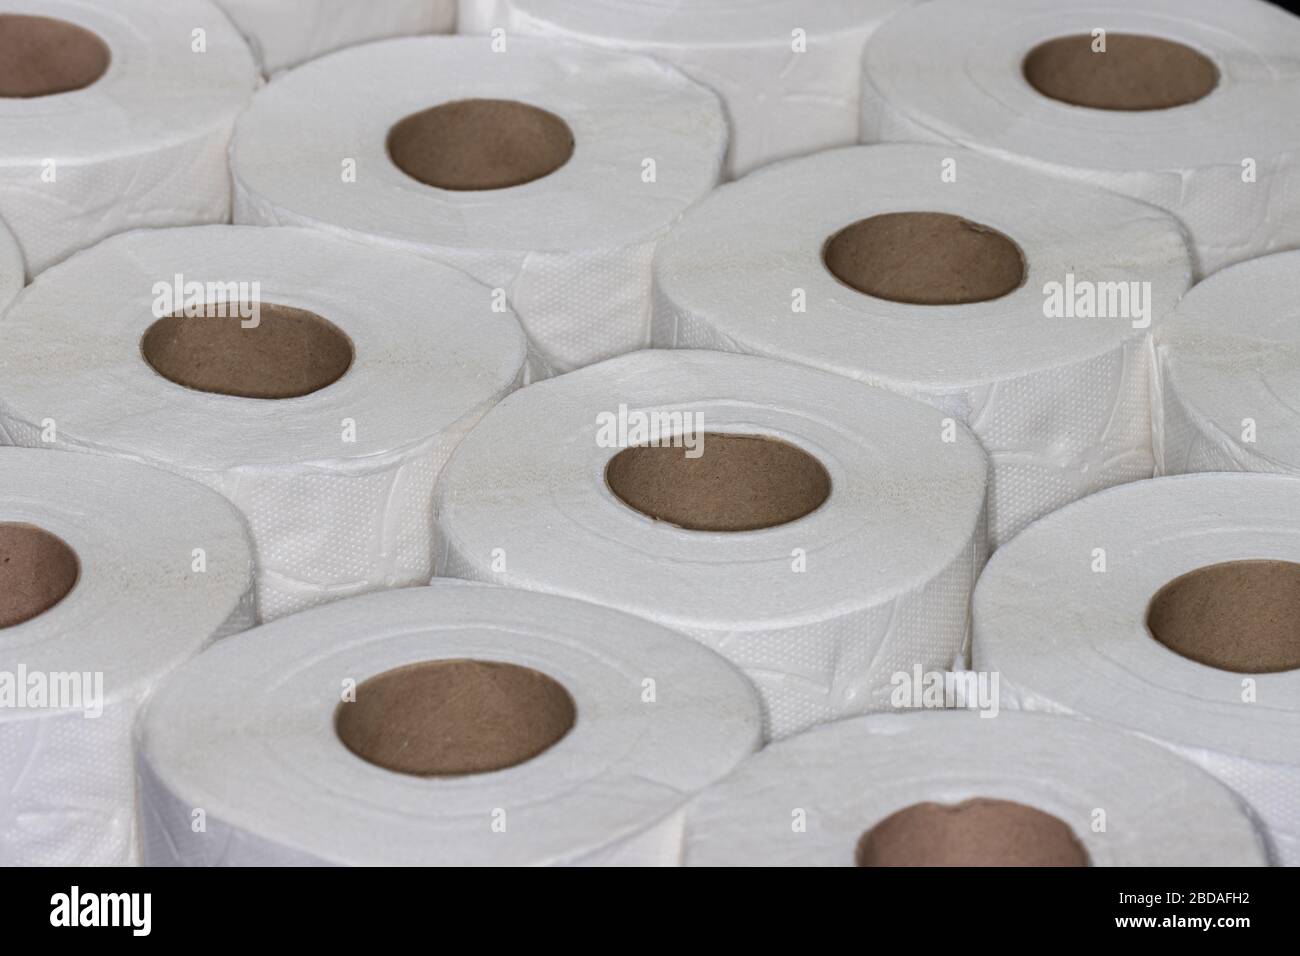 Layer of white toilet paper rolls seen from angle above filling frame Stock Photo